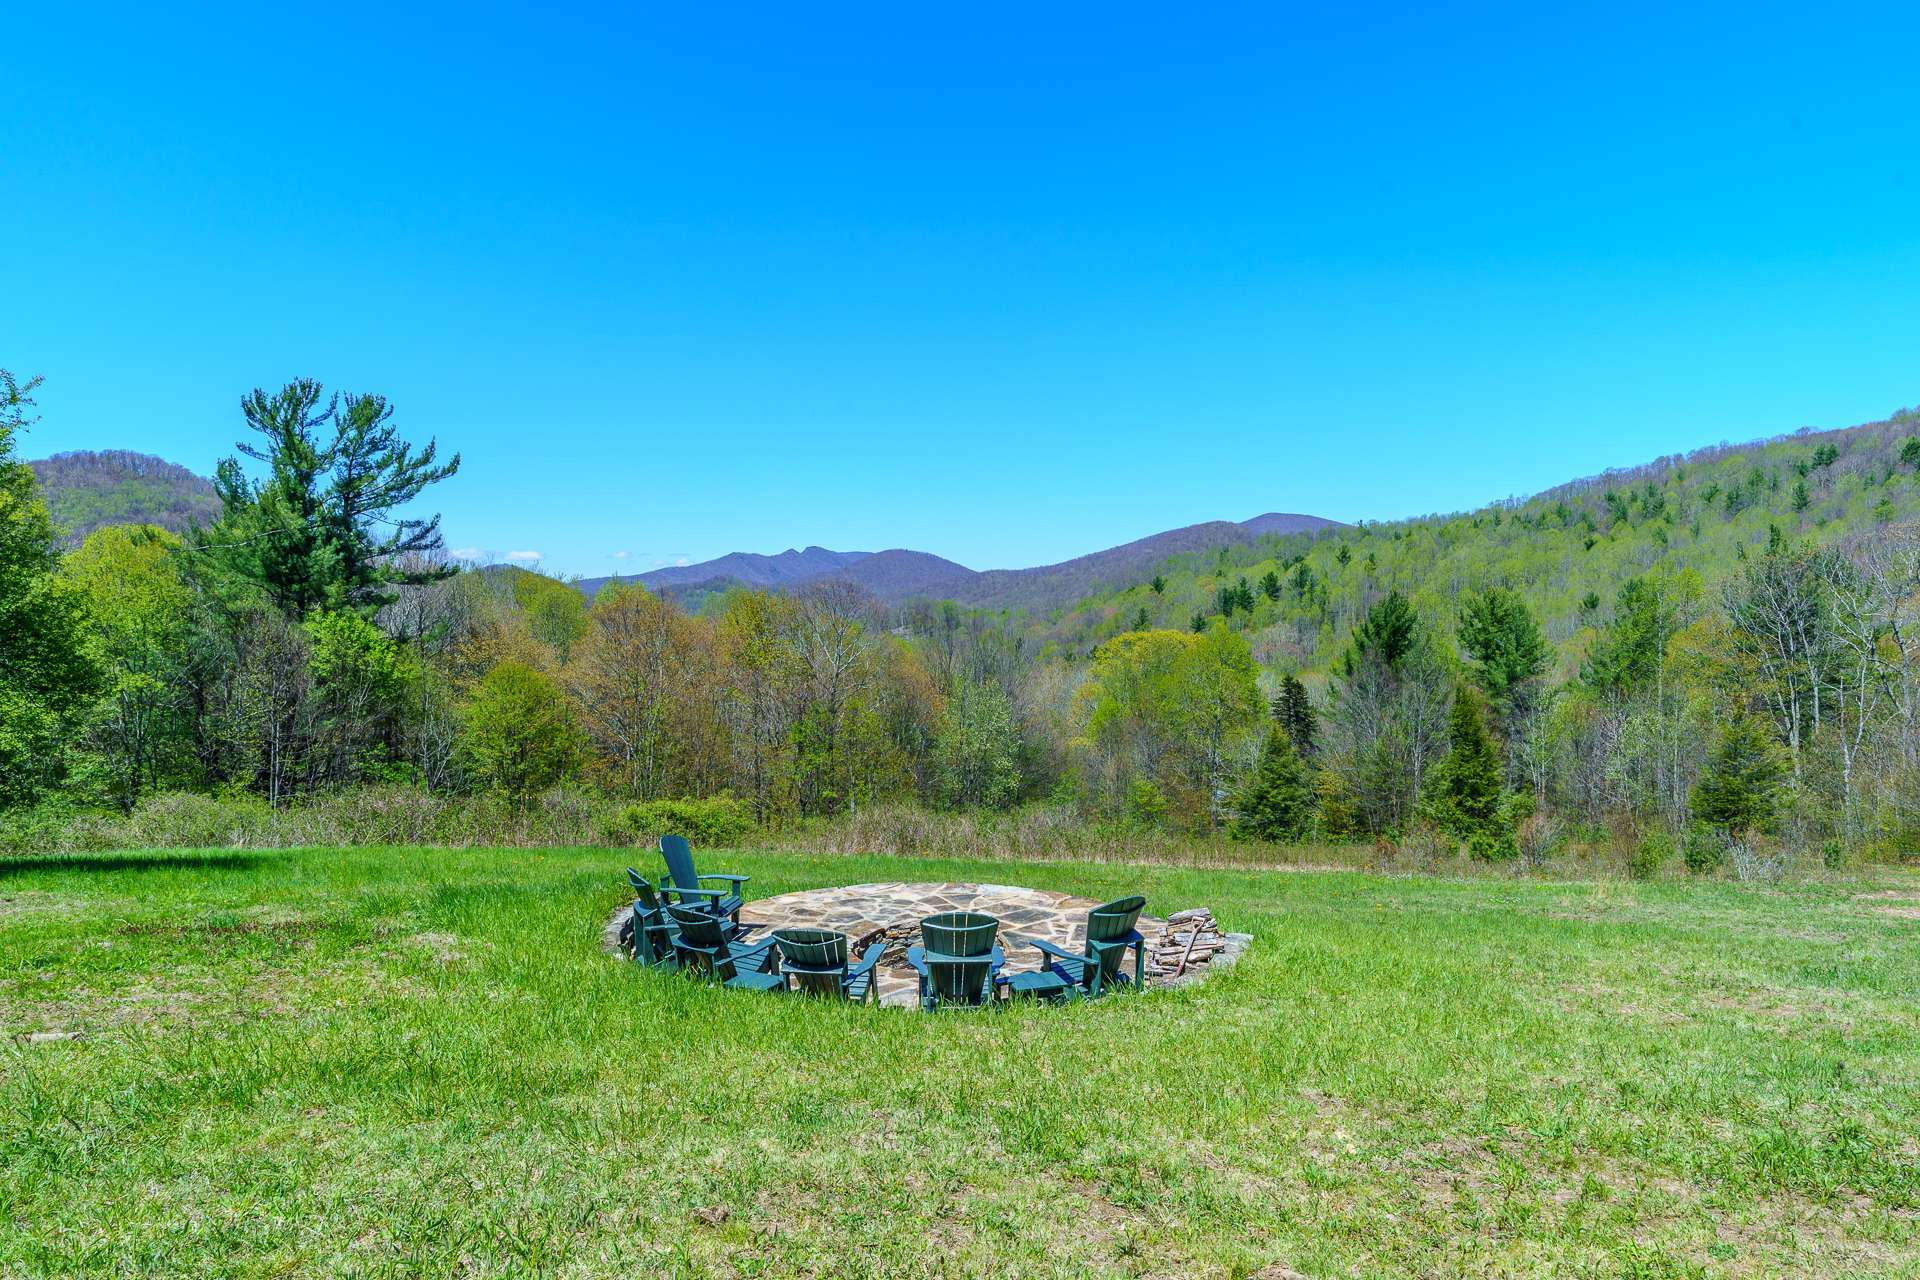 Thoughts of Mountain Top Living conjure up images of peace, tranquility and security… Sanctuary Mountain, a 75-acre private estate in Todd, NC, will not disappoint!